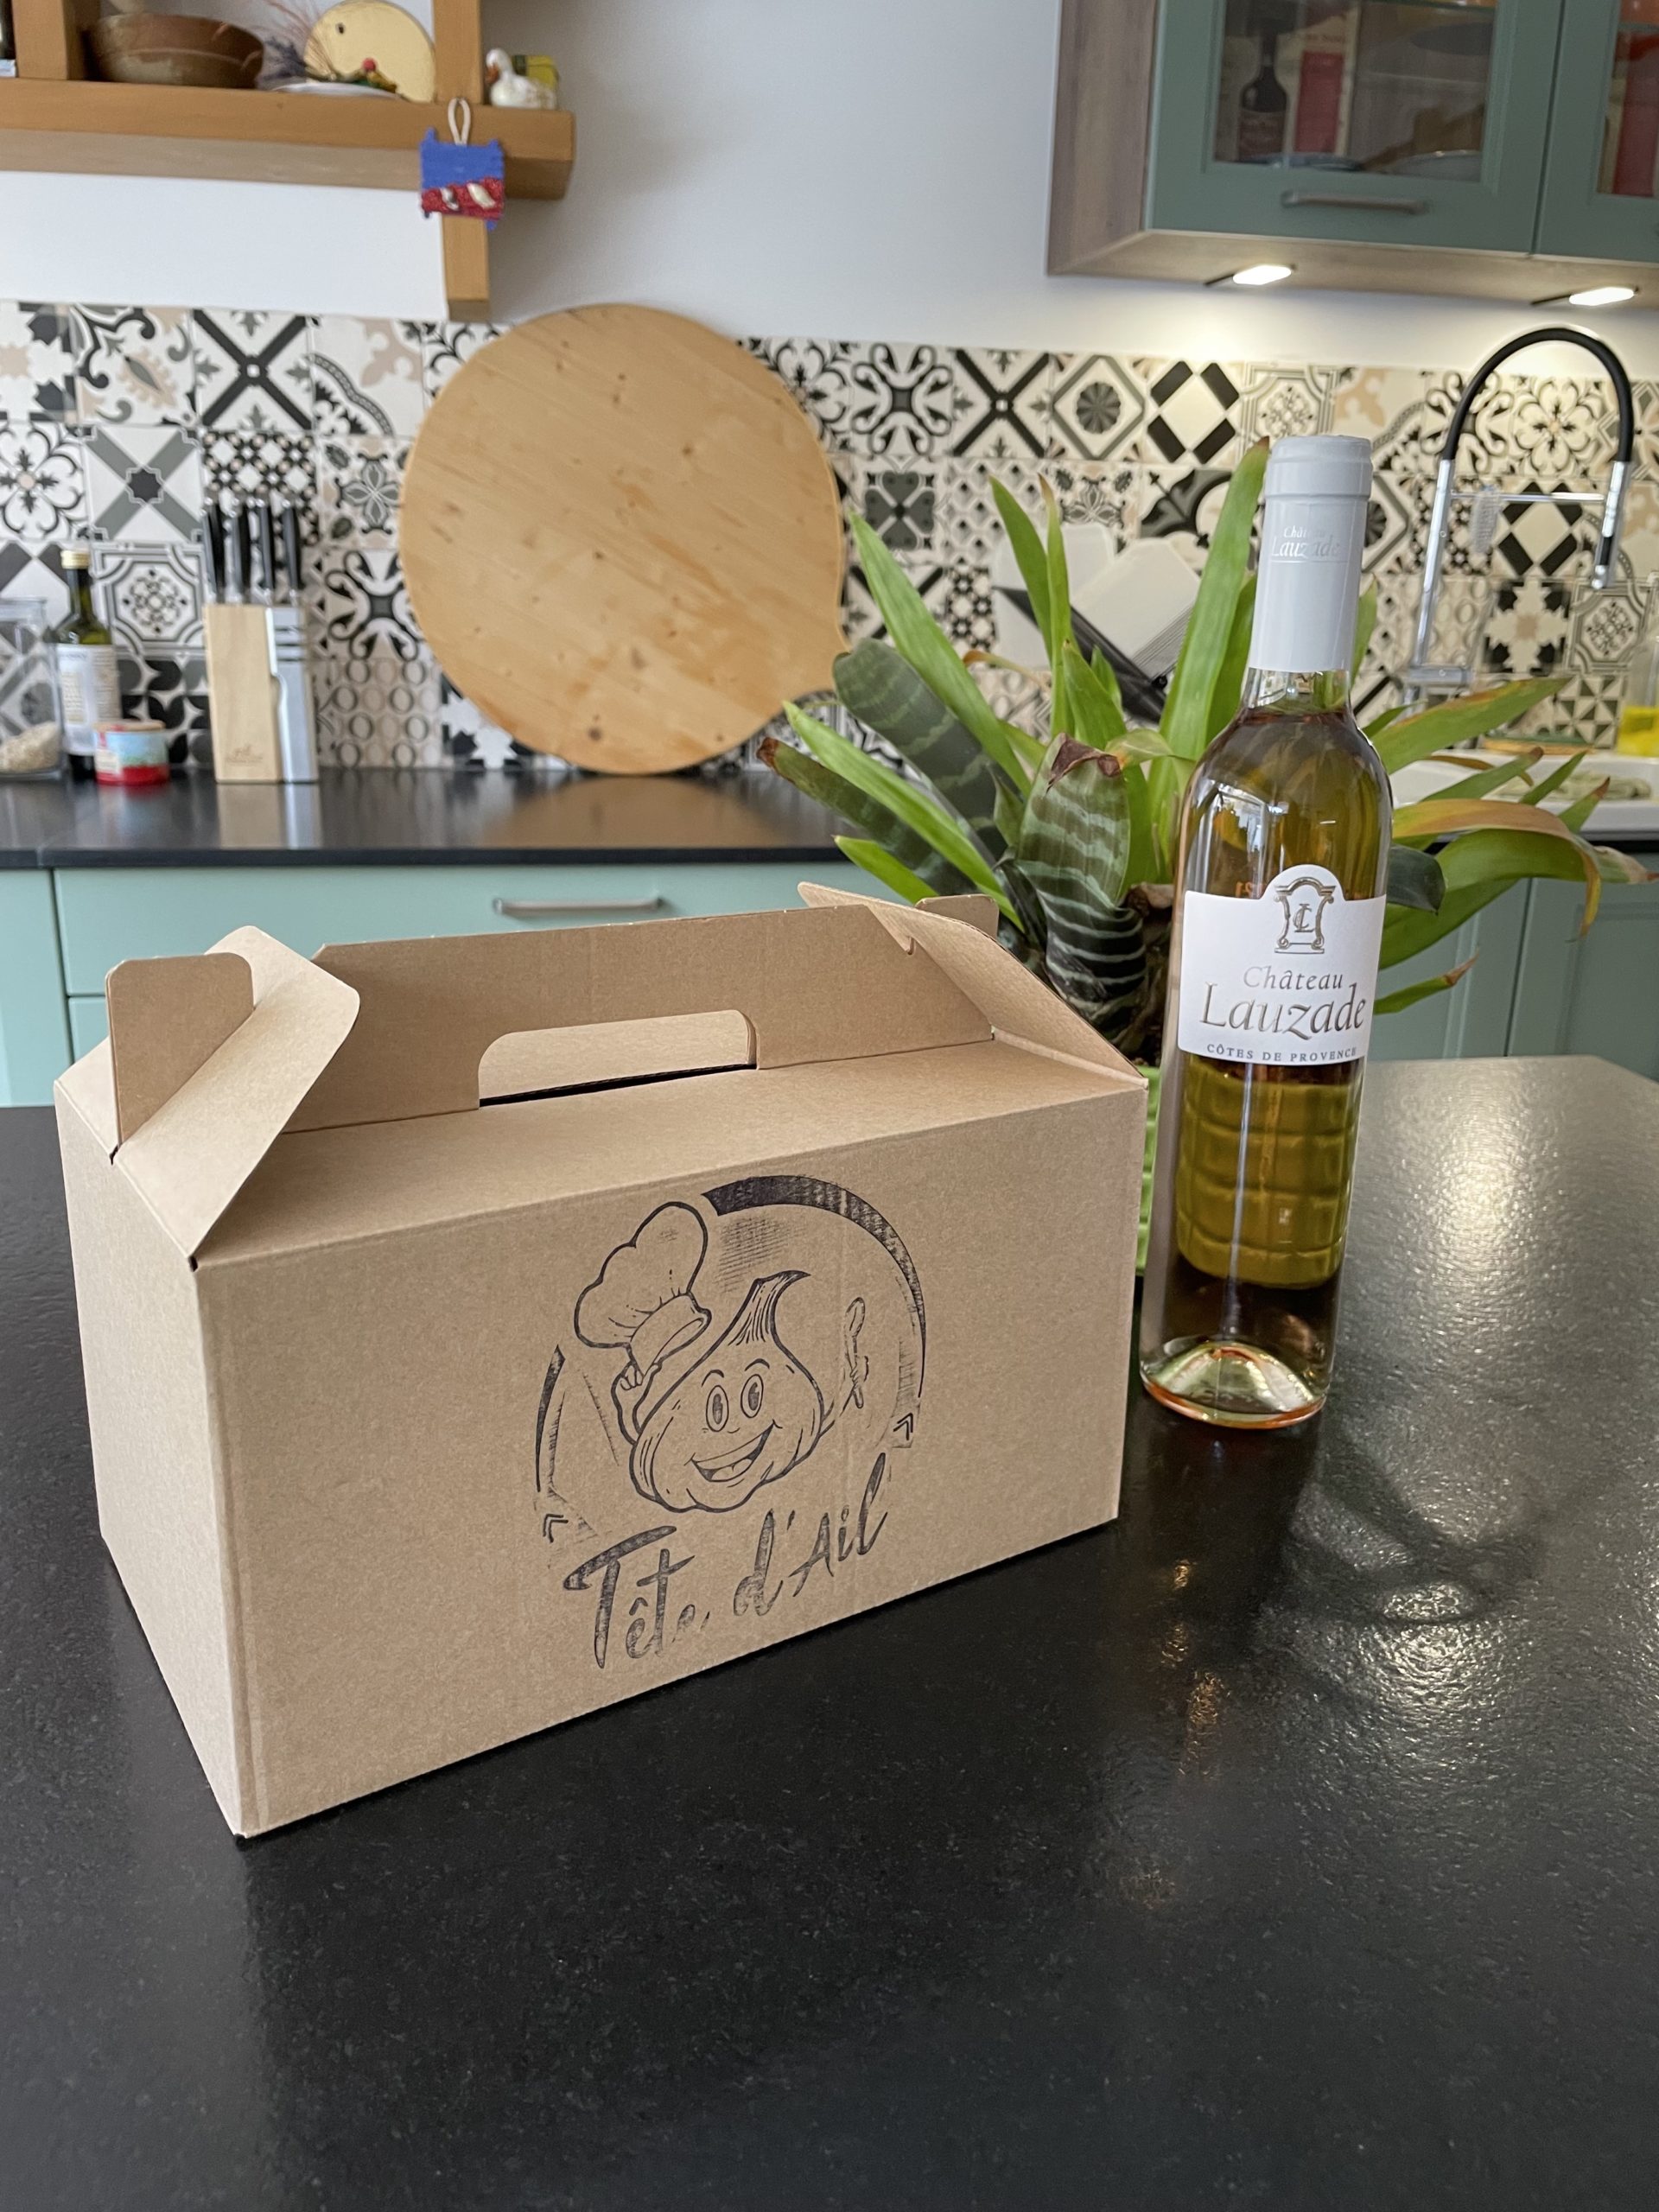 provencal picnic in a box with rose wine